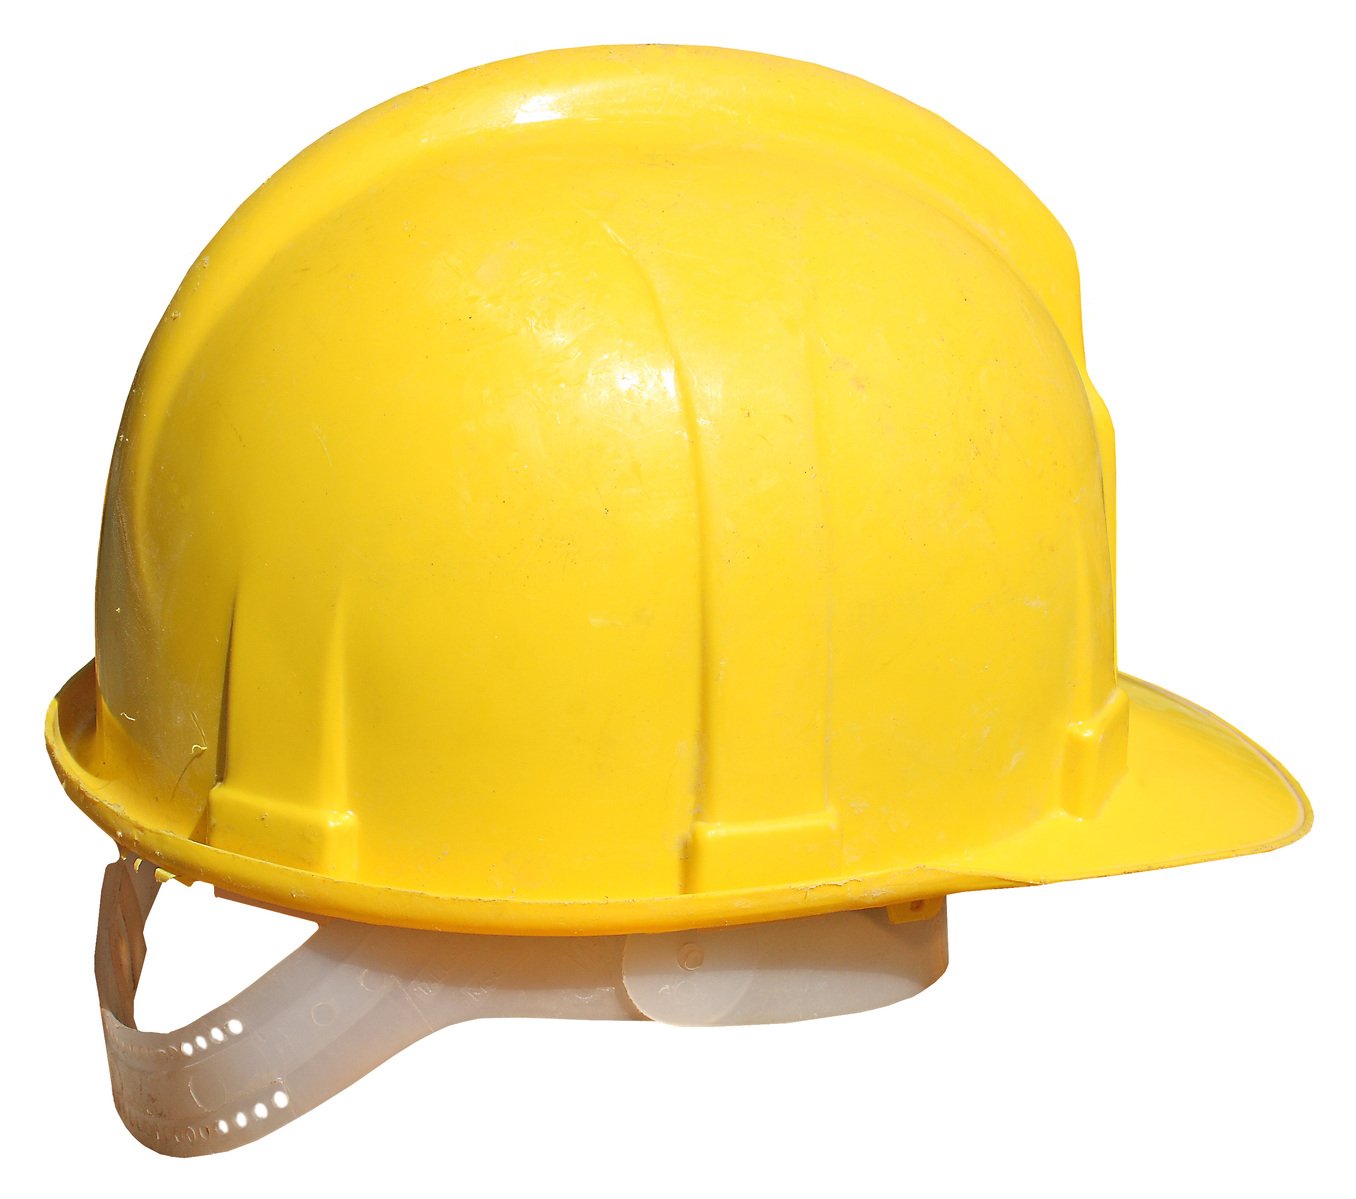 a yellow hard hat on top of a white object